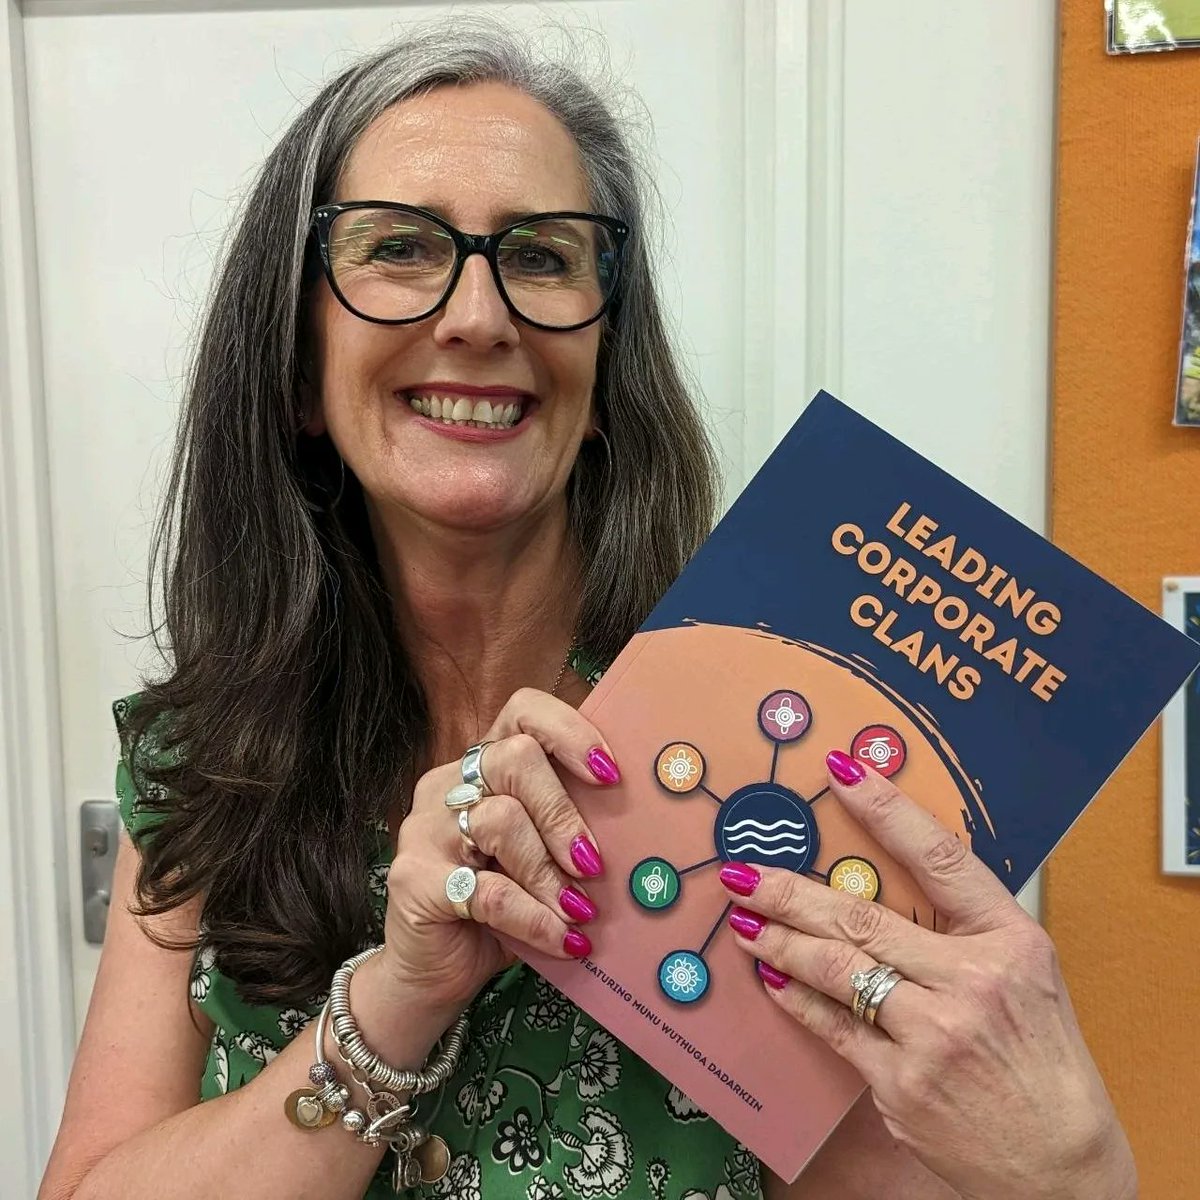 A happy #author with her book on launch day! #WritingCommunity